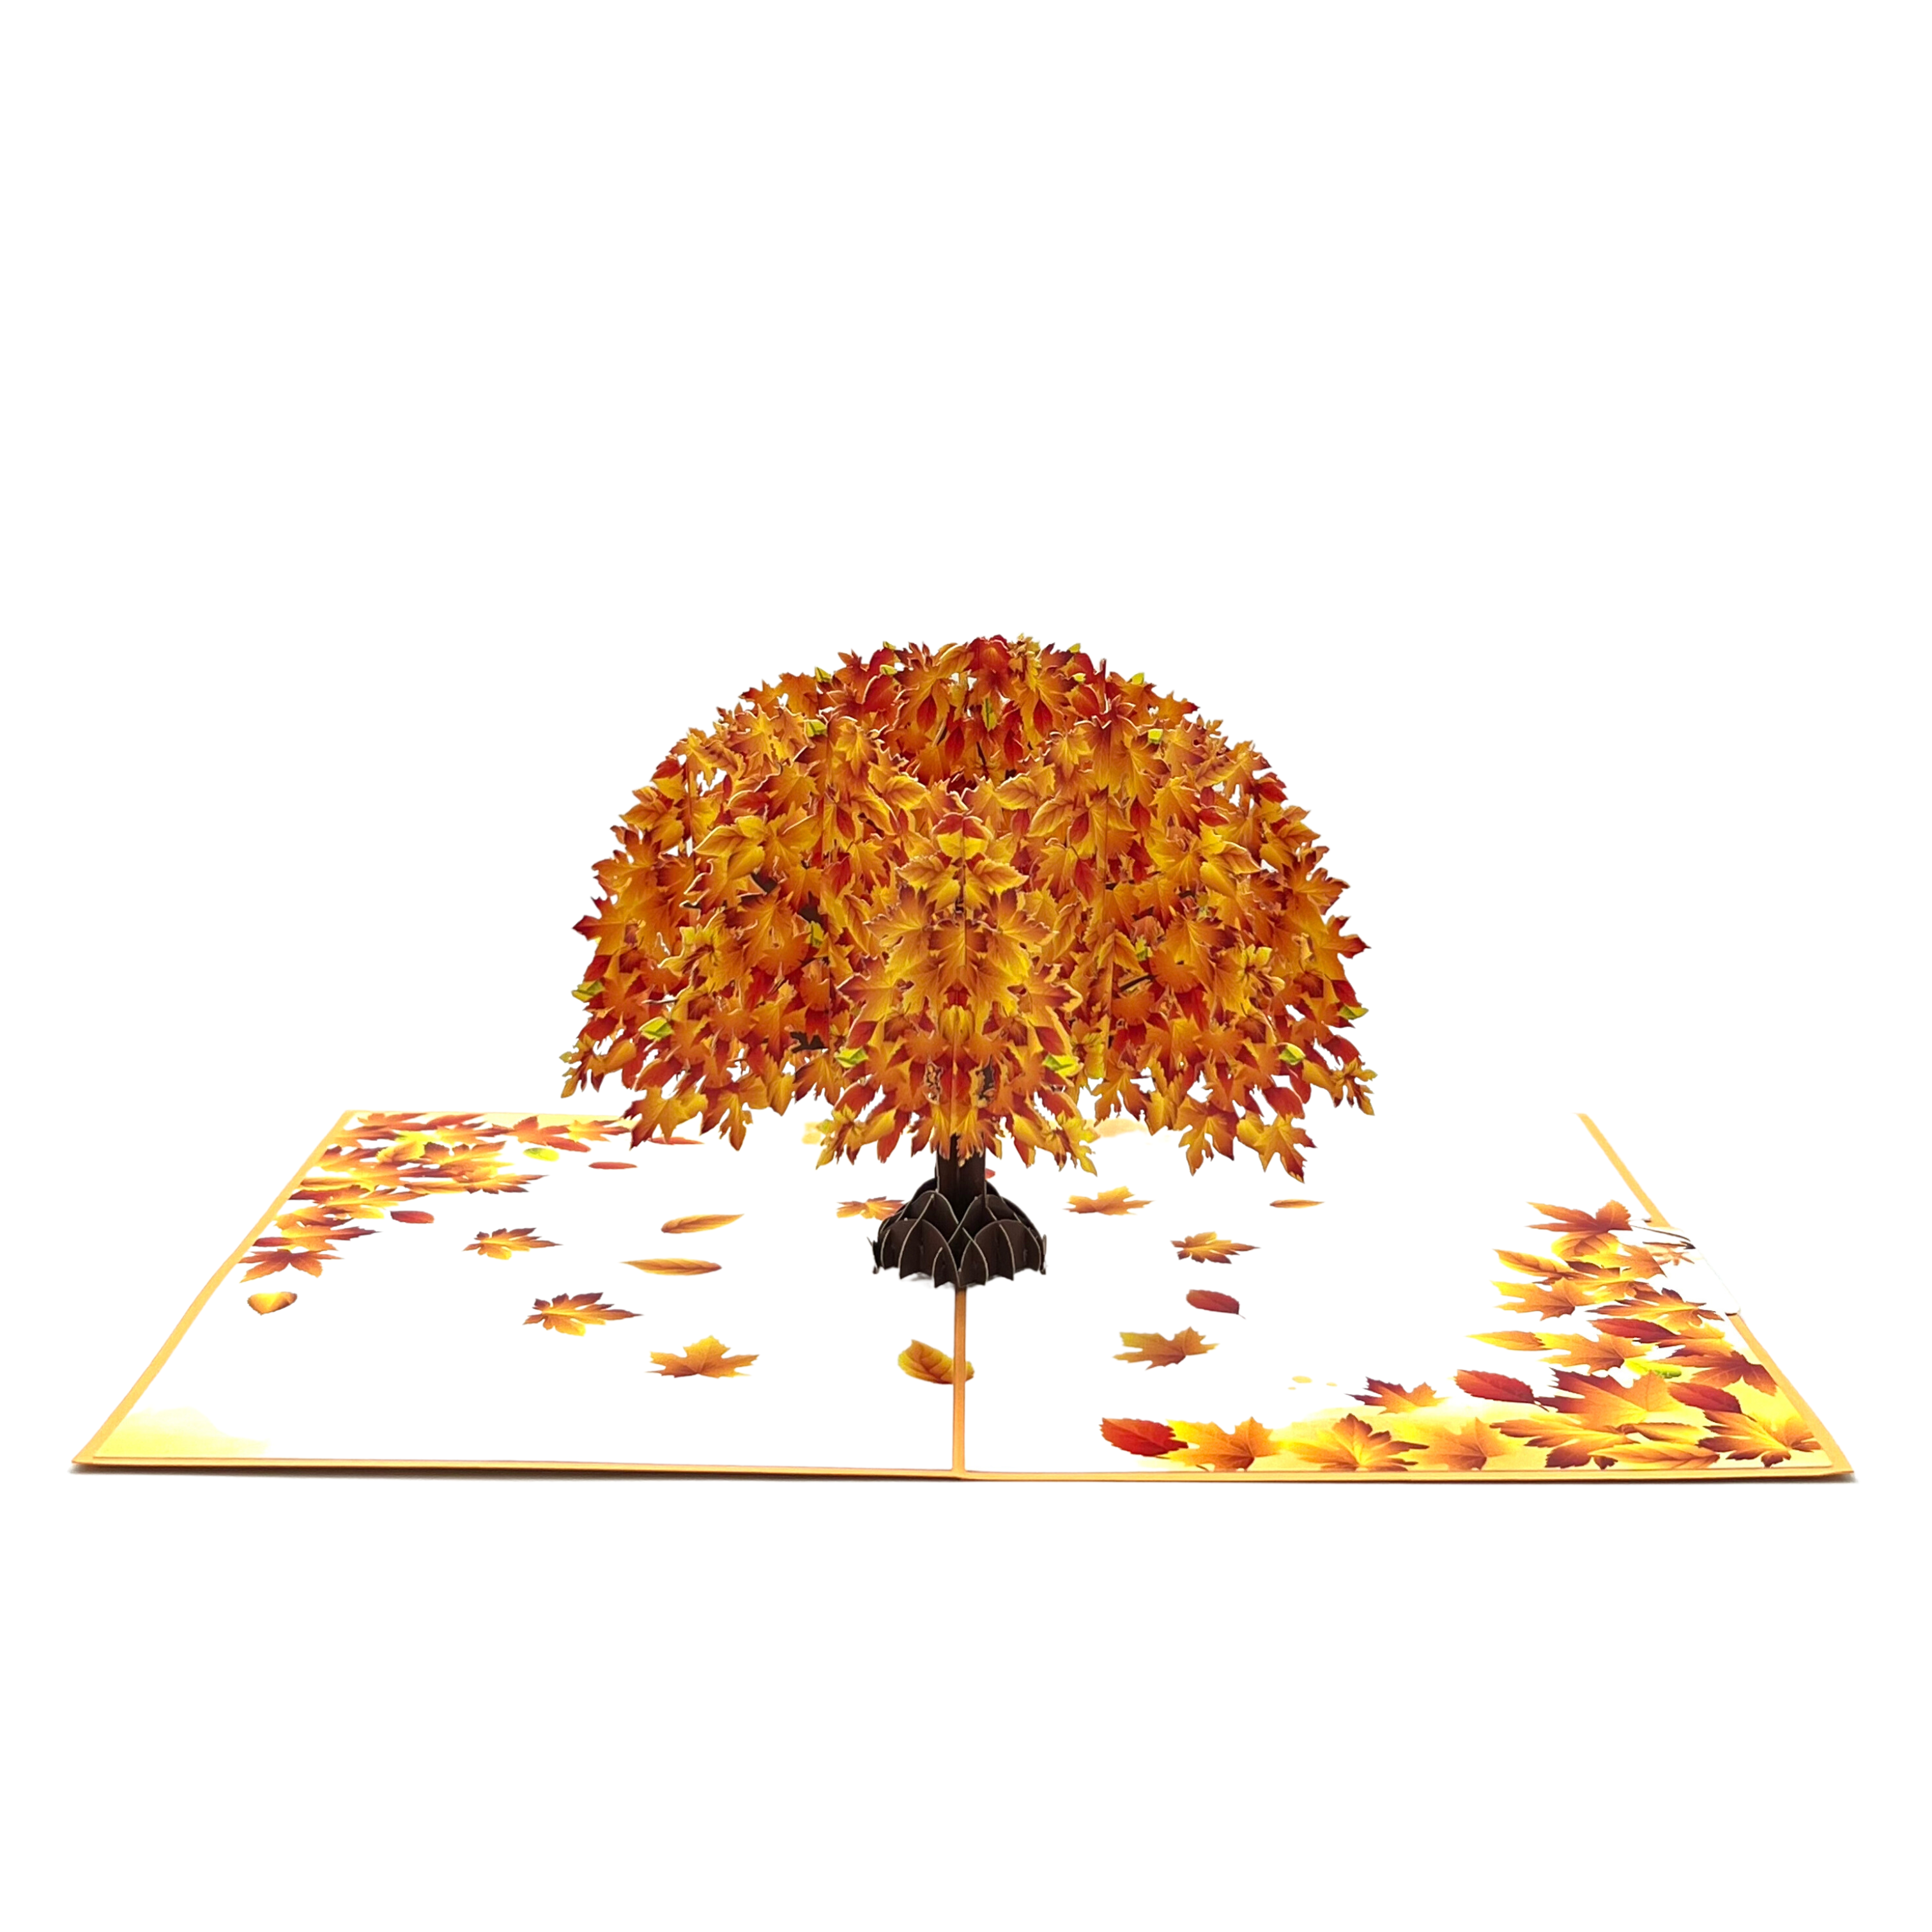 Pop Up Greeting Card Japanese Maple Orange Dream Autumn Card Thank You Birthday Card Nature Card Fall Color Gift Card for Kid Mom Dad Family